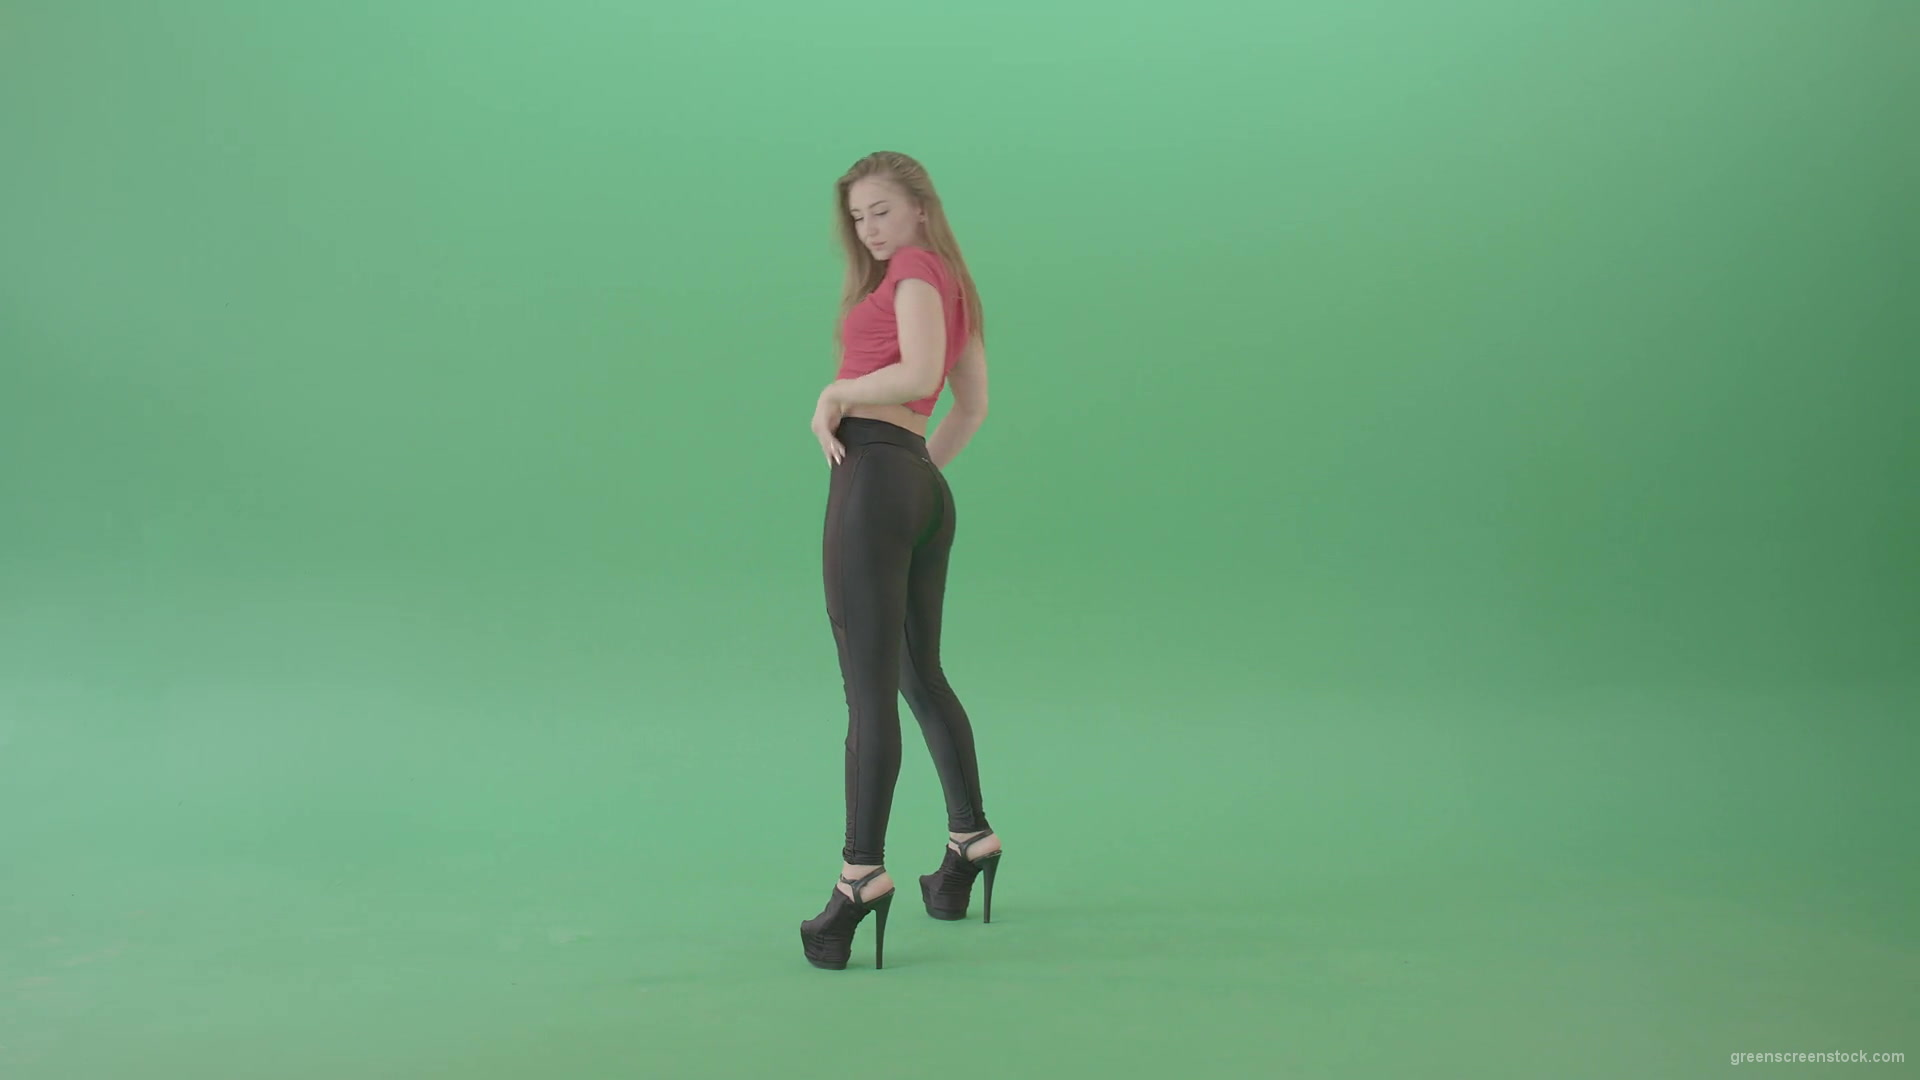 Sexy-posing-girl-showing-buts-and-dancing-on-green-screen-4K-Video-Footage-1920_009 Green Screen Stock